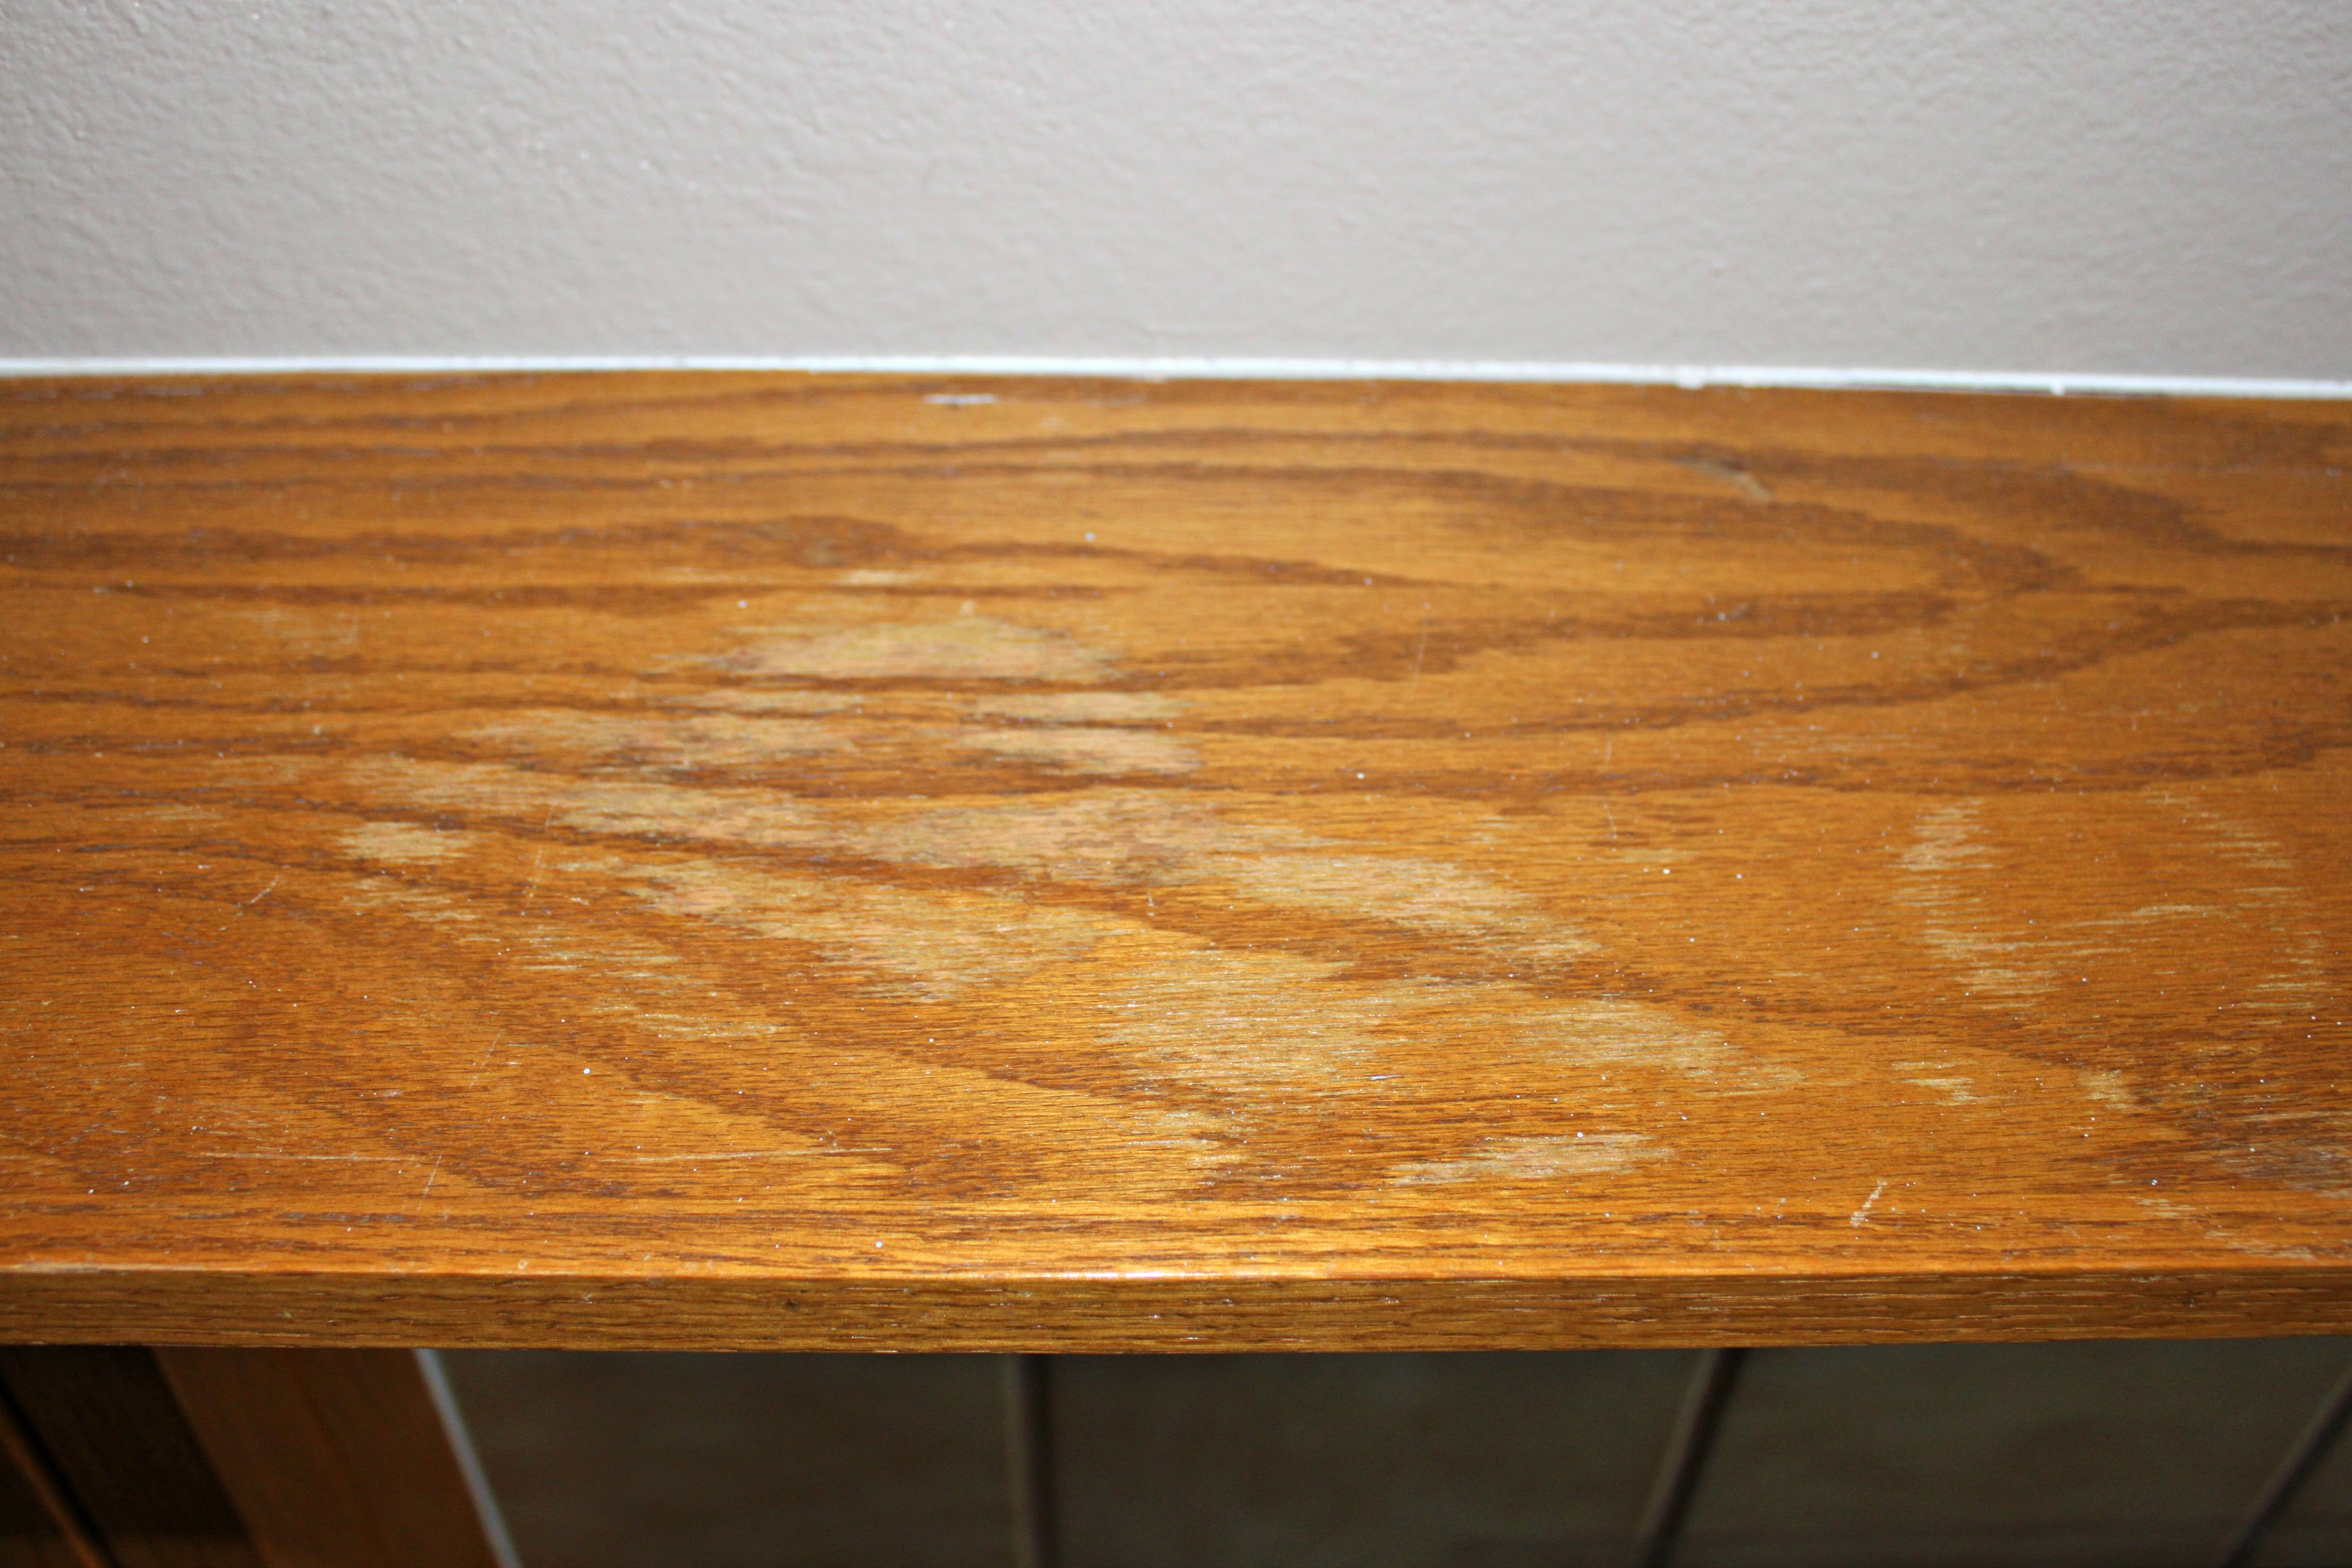 How to Remove Water Stains from Wood - Sometimes Homemade